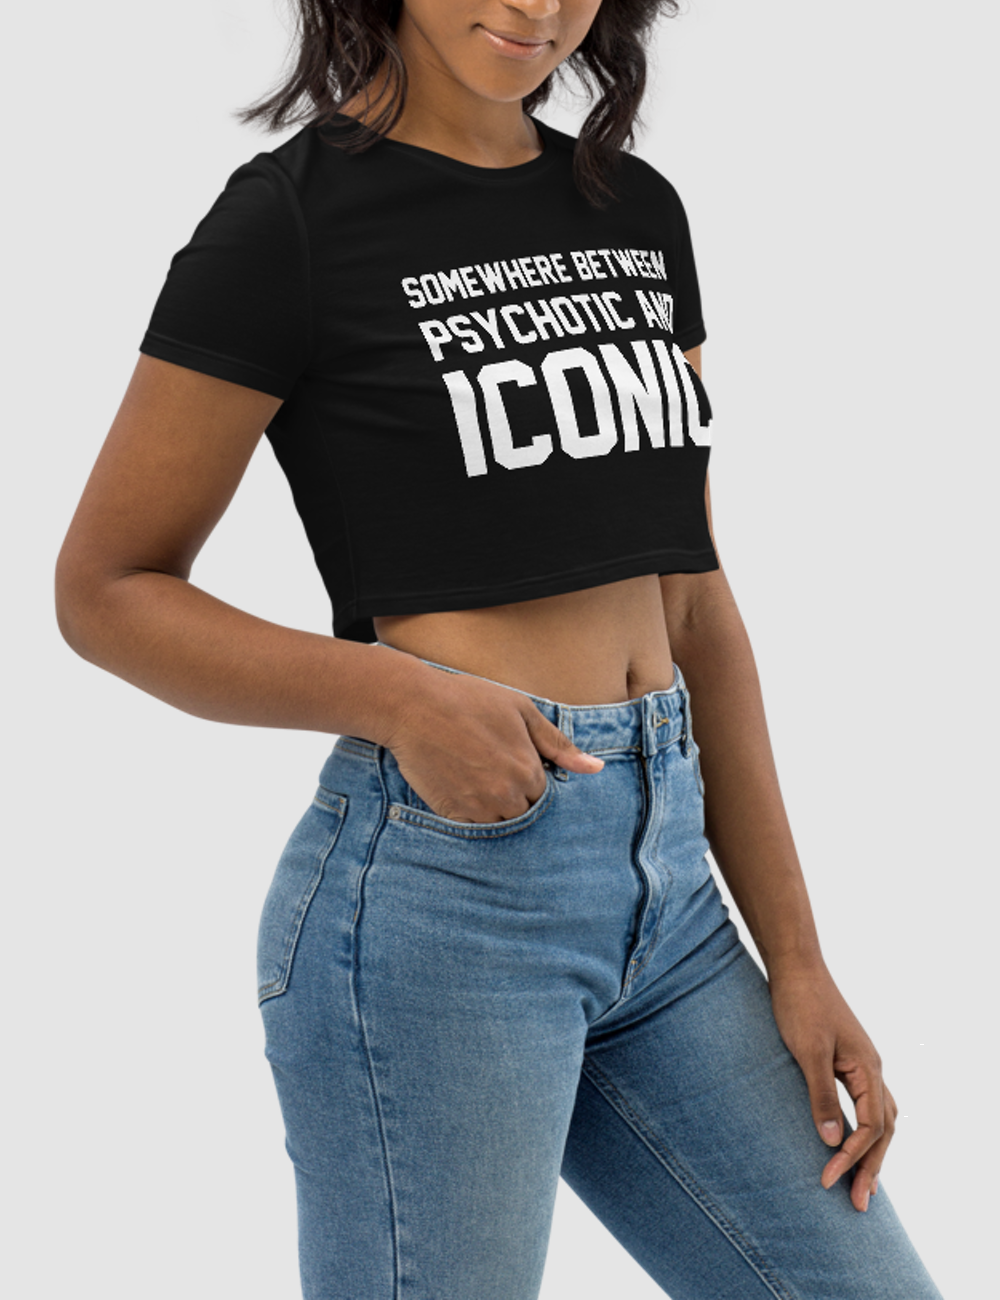 Somewhere Between Psychotic And Iconic Women's Fitted Crop Top T-Shirt OniTakai